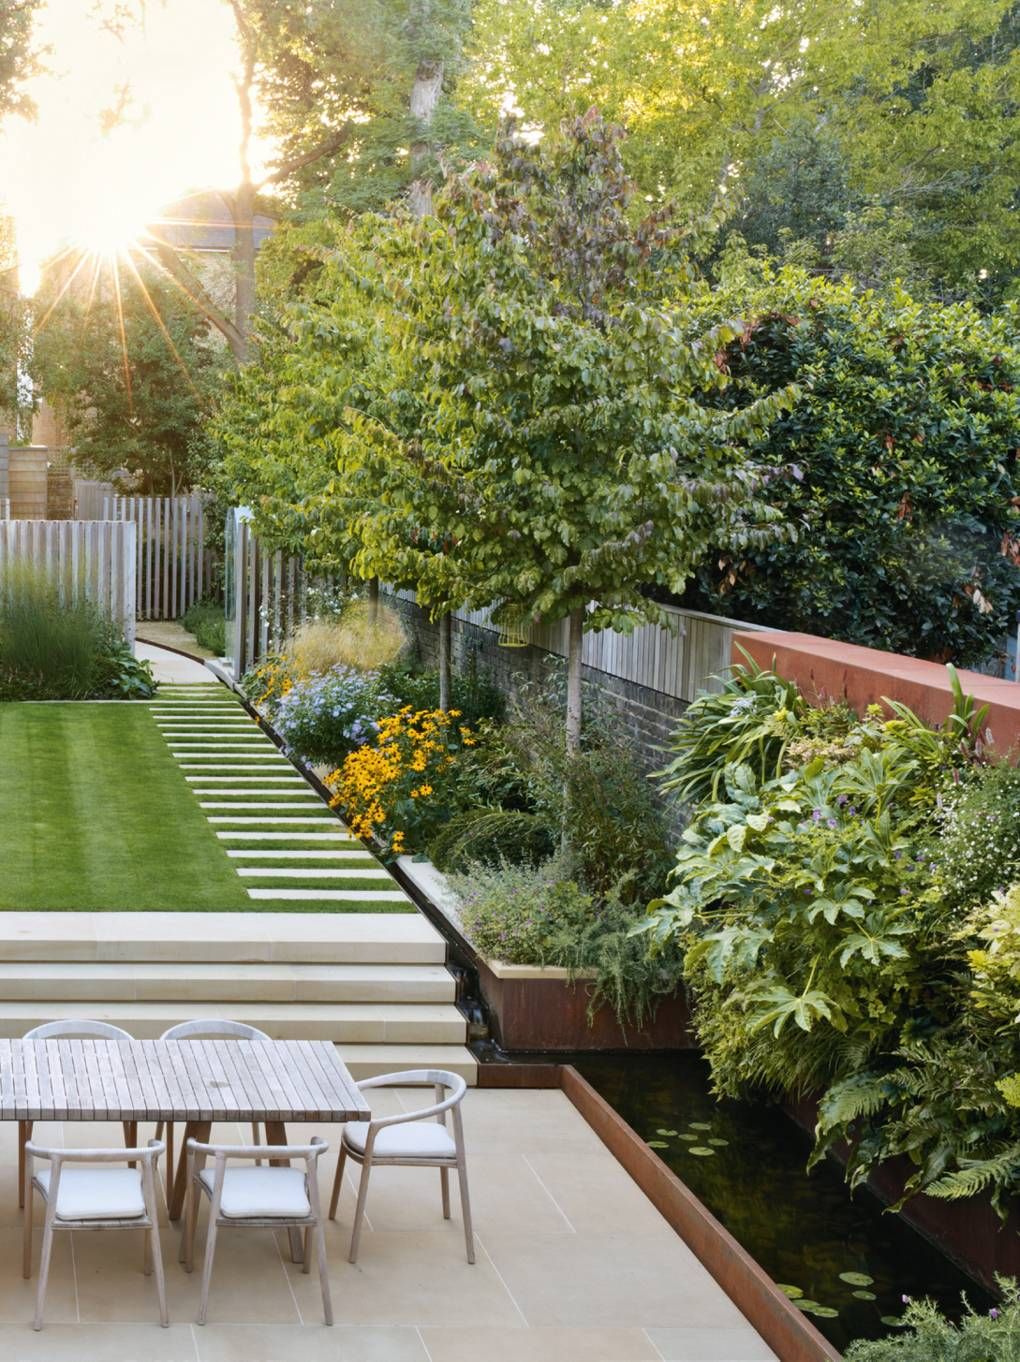 Creating a Stunning Landscape Garden Design: A Harmony of Nature and Architecture